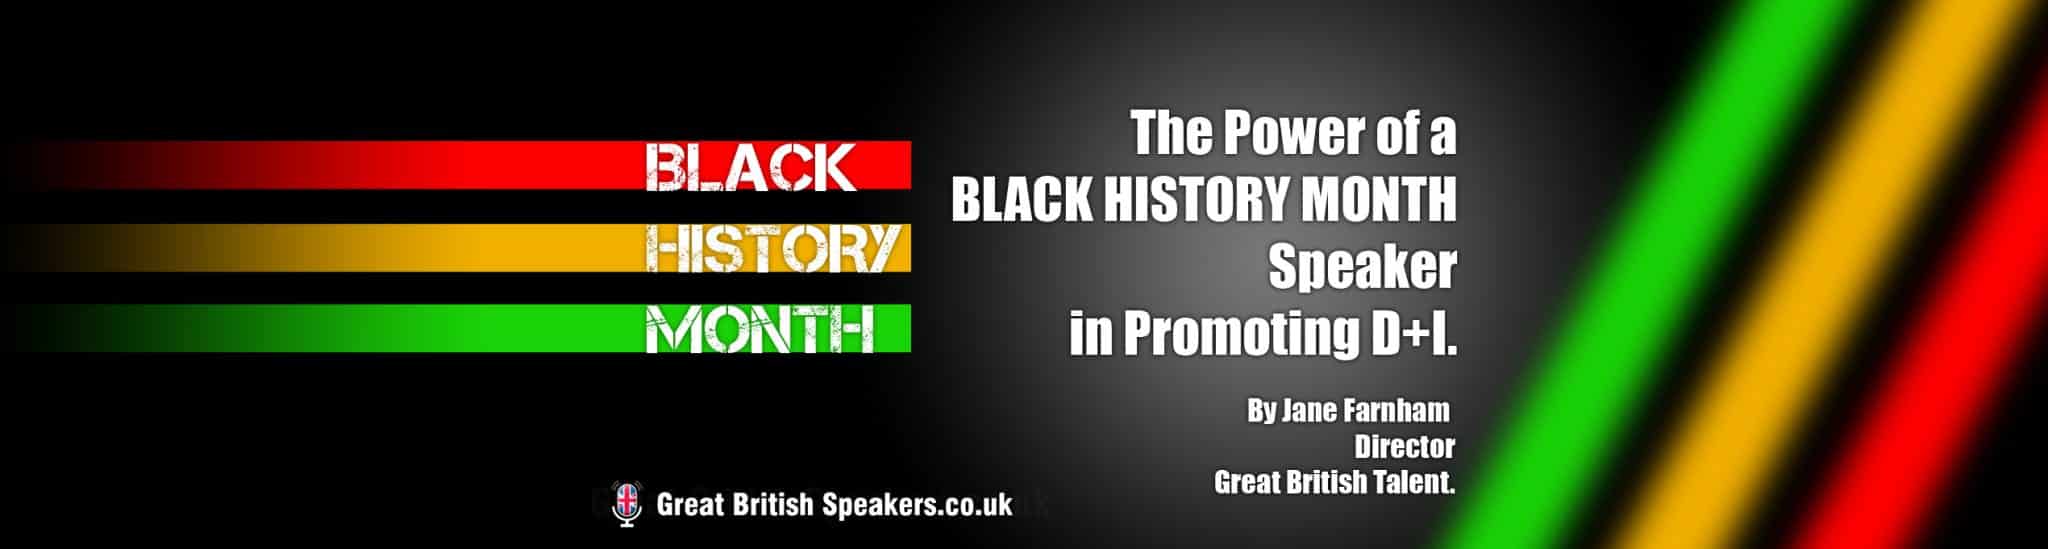 The Power of a Black History Month Speaker in Promoting Diversity and Inclusion at Great British Speakers